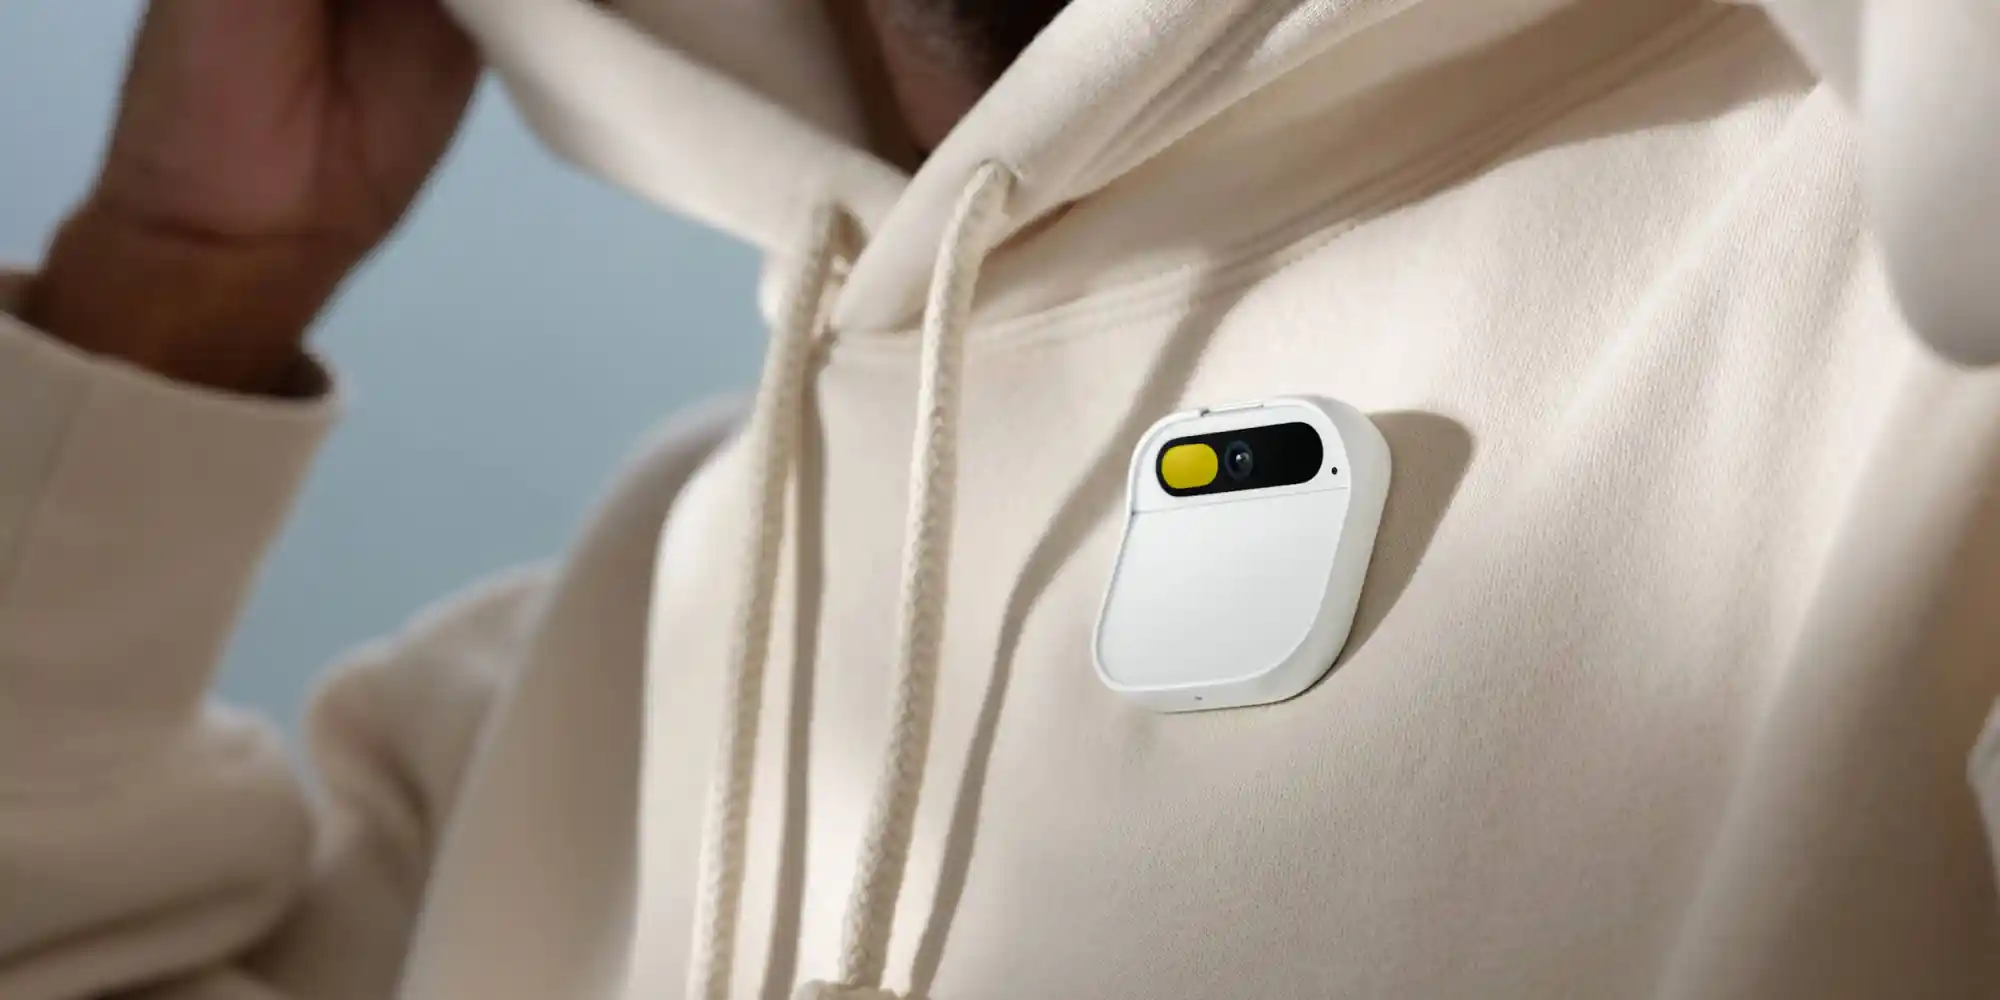 ❤ Humane’s Ai Pin won’t replace your phone, but it should go after the smartwatch